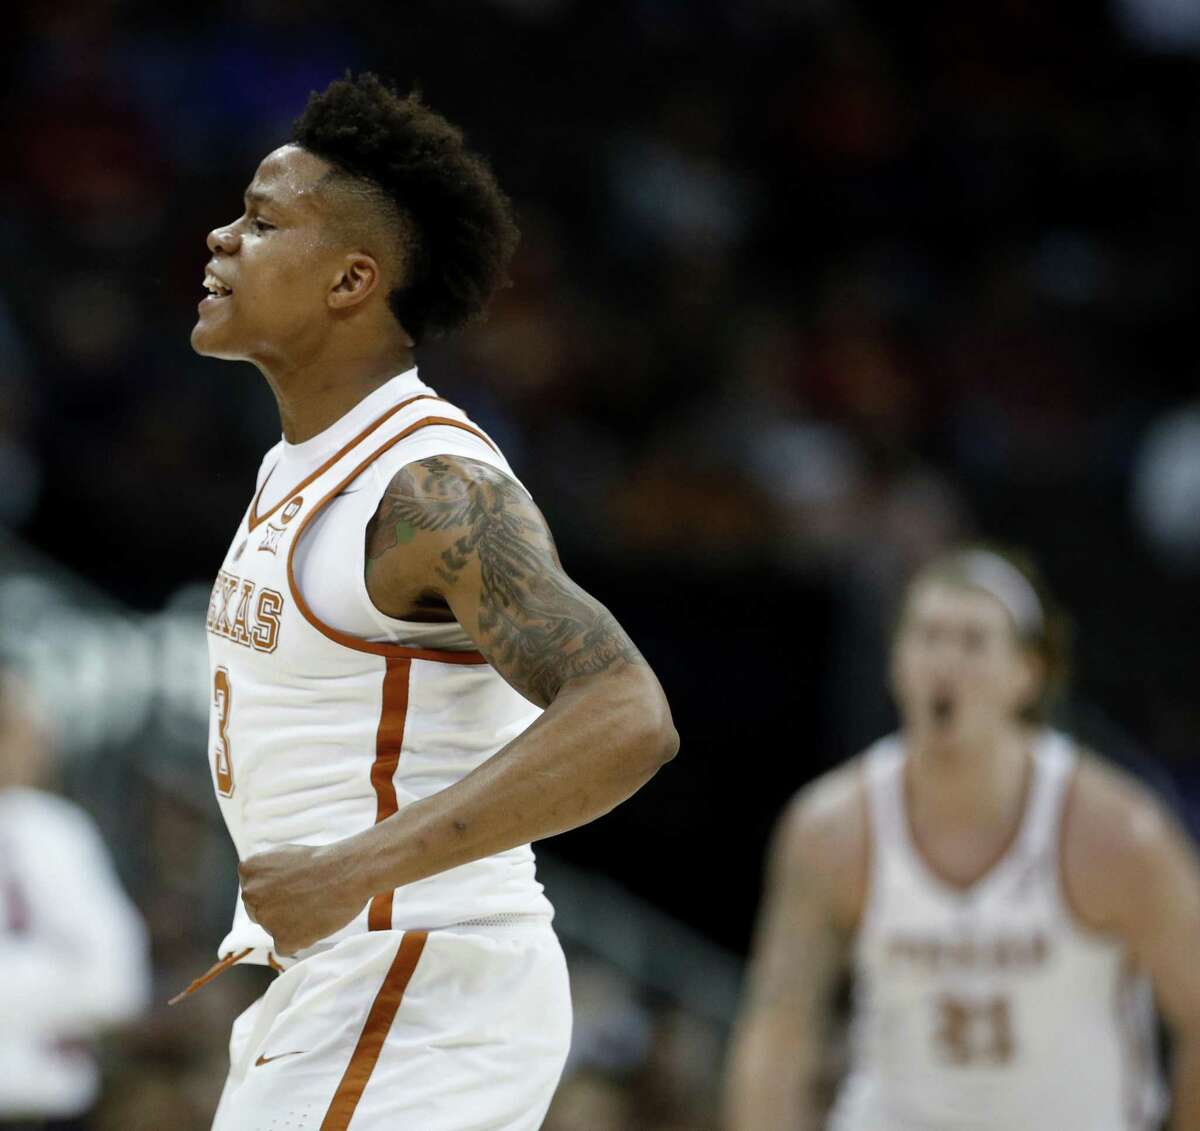 Texas' Jacob Young celebrates a teammate's basket during the first half of an NCAA college basketball game against Iowa State in the Big 12 men's tournament Wednesday, March 7, 2018, in Kansas City, Mo. (AP Photo/Charlie Riedel)